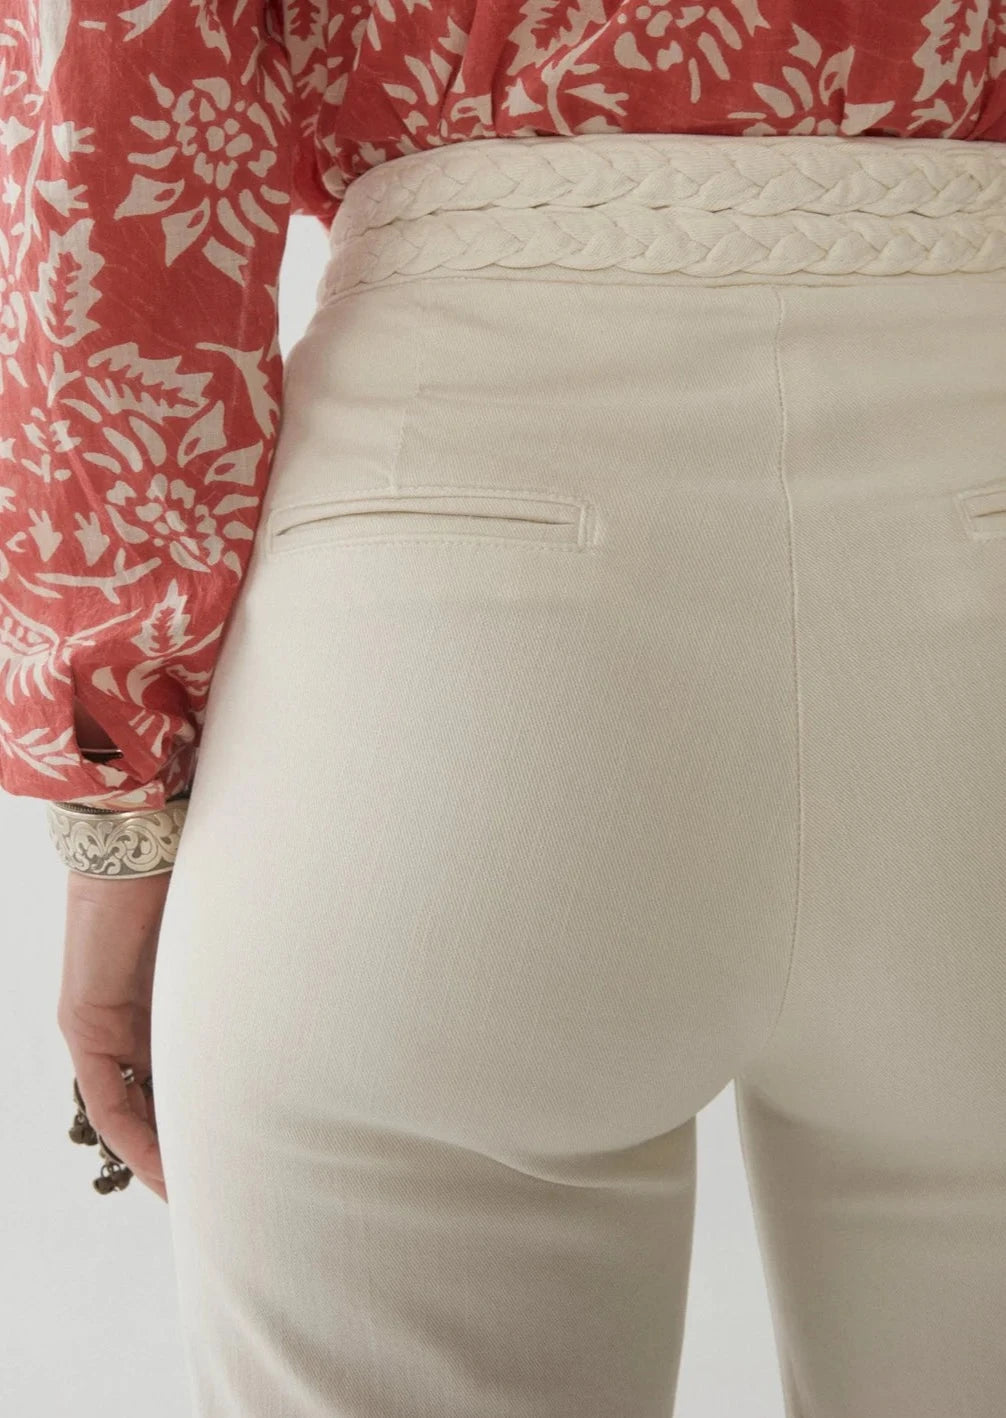 Maison Hotel Ross Trousers - Disco White